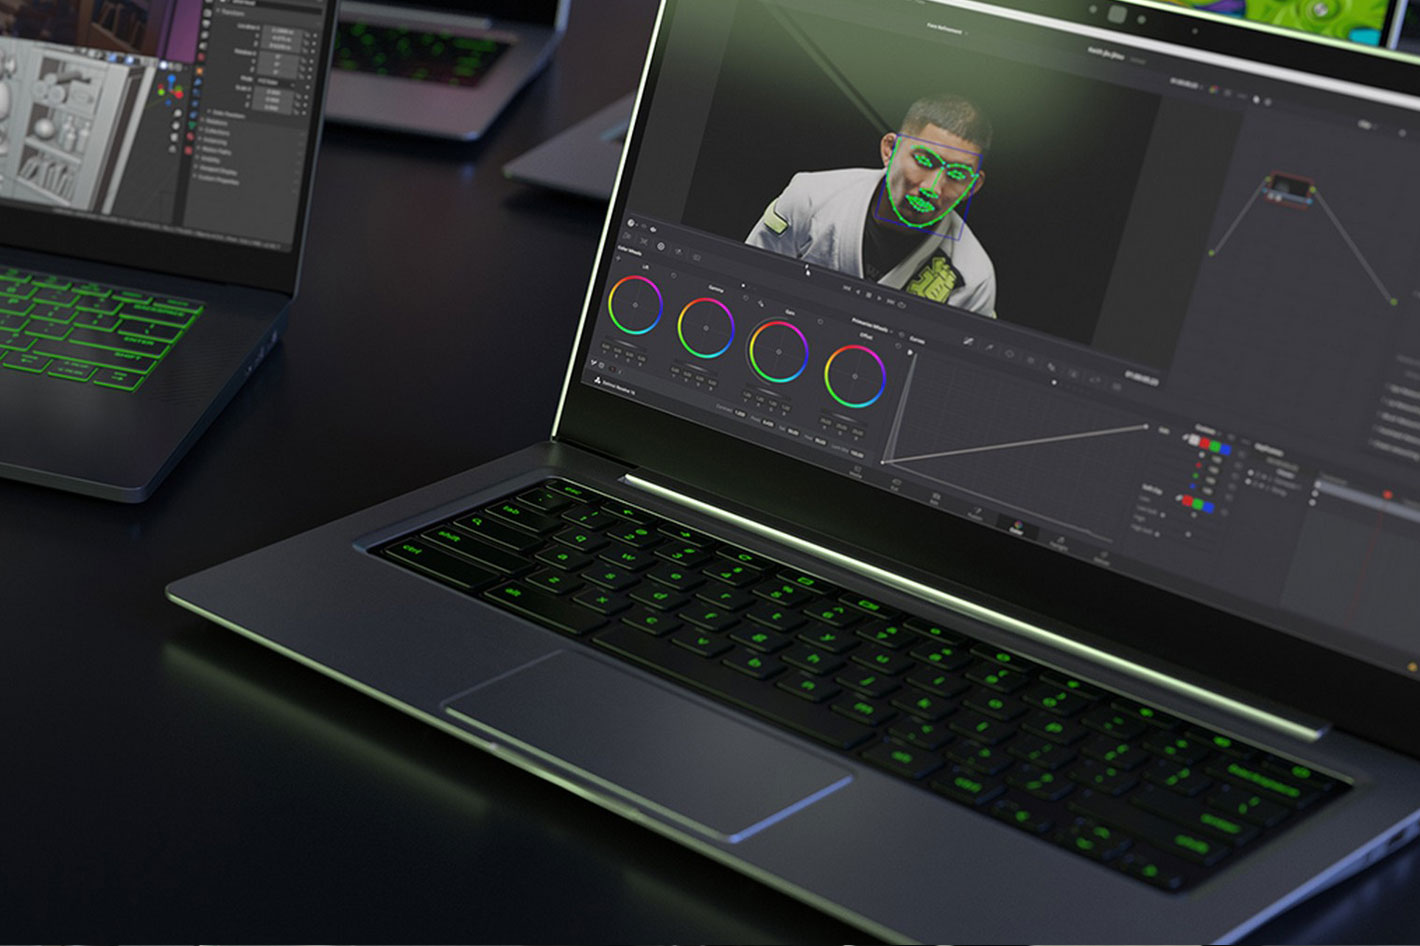 New NVIDIA Studio laptops for photographers and video editors